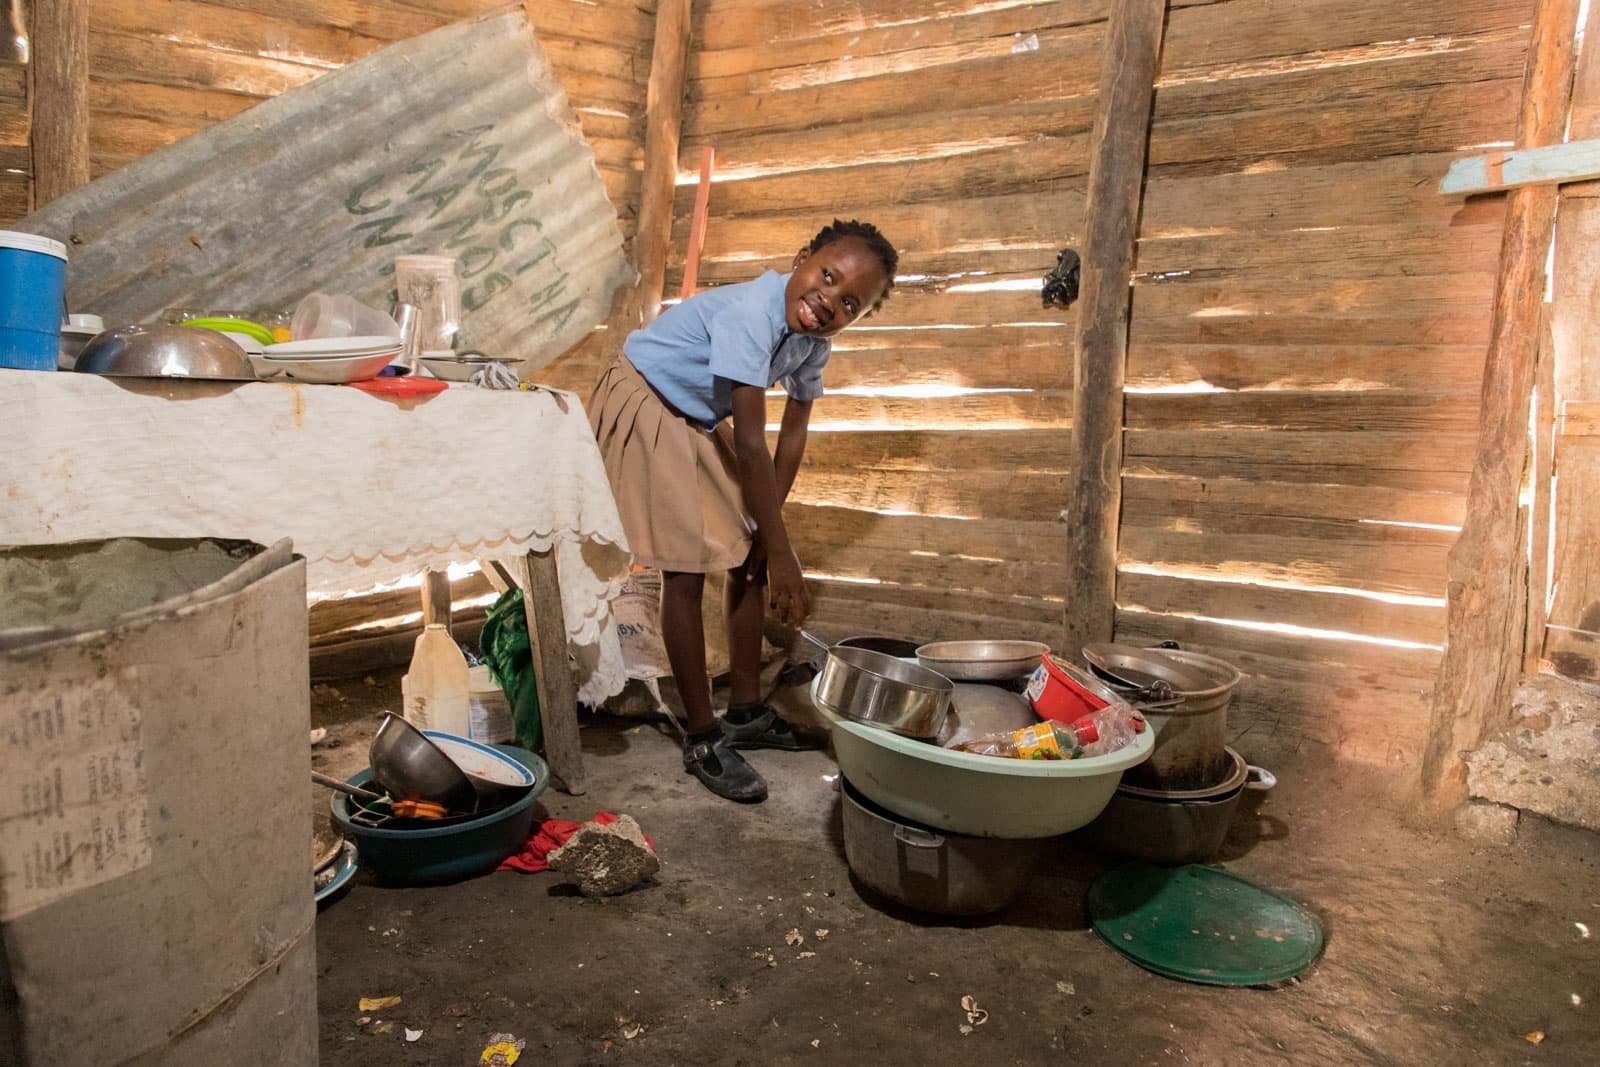 Yosaira Yaque, 9 years old, is wearing her school uniform, a khaki skirt, sky blue shirt, black shoes, and black socks. She is cooking in the kitchen of her home, which is in the left part of her and her sister’s room. The walls of her house have holes in them which allow water to get in when it rains.